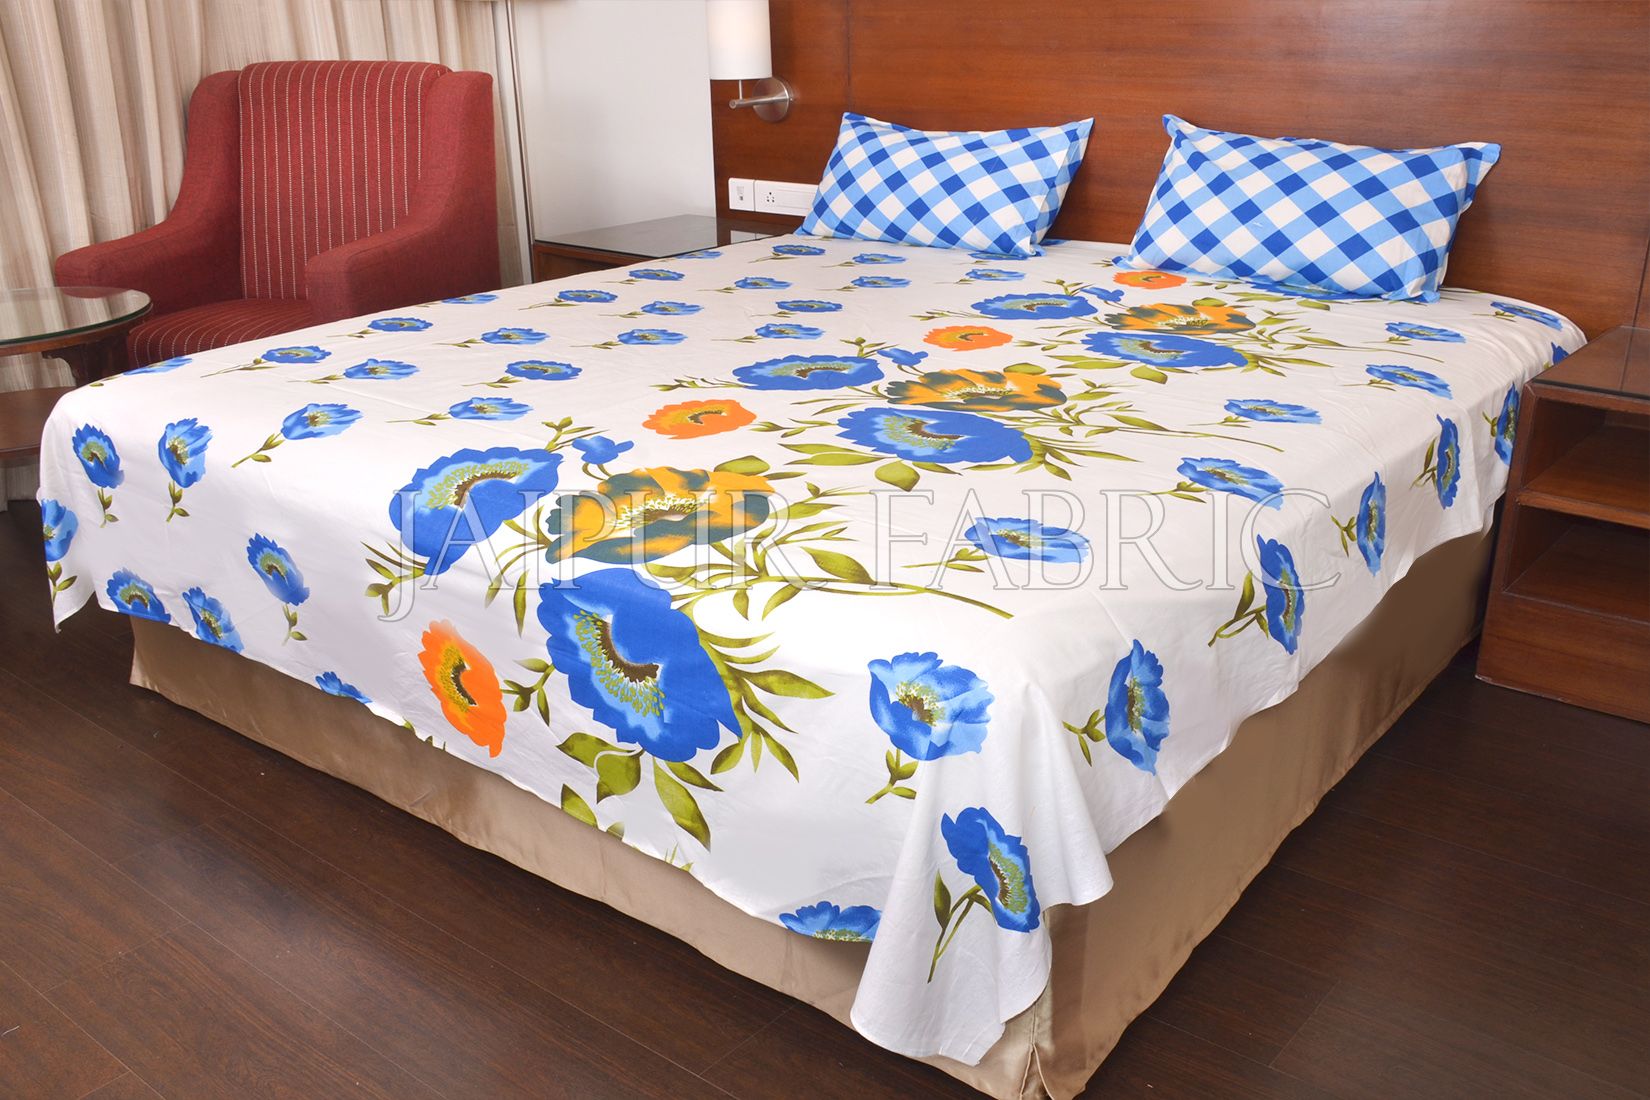 Blue Checkered Plaid Pattern Double Bed Sheet